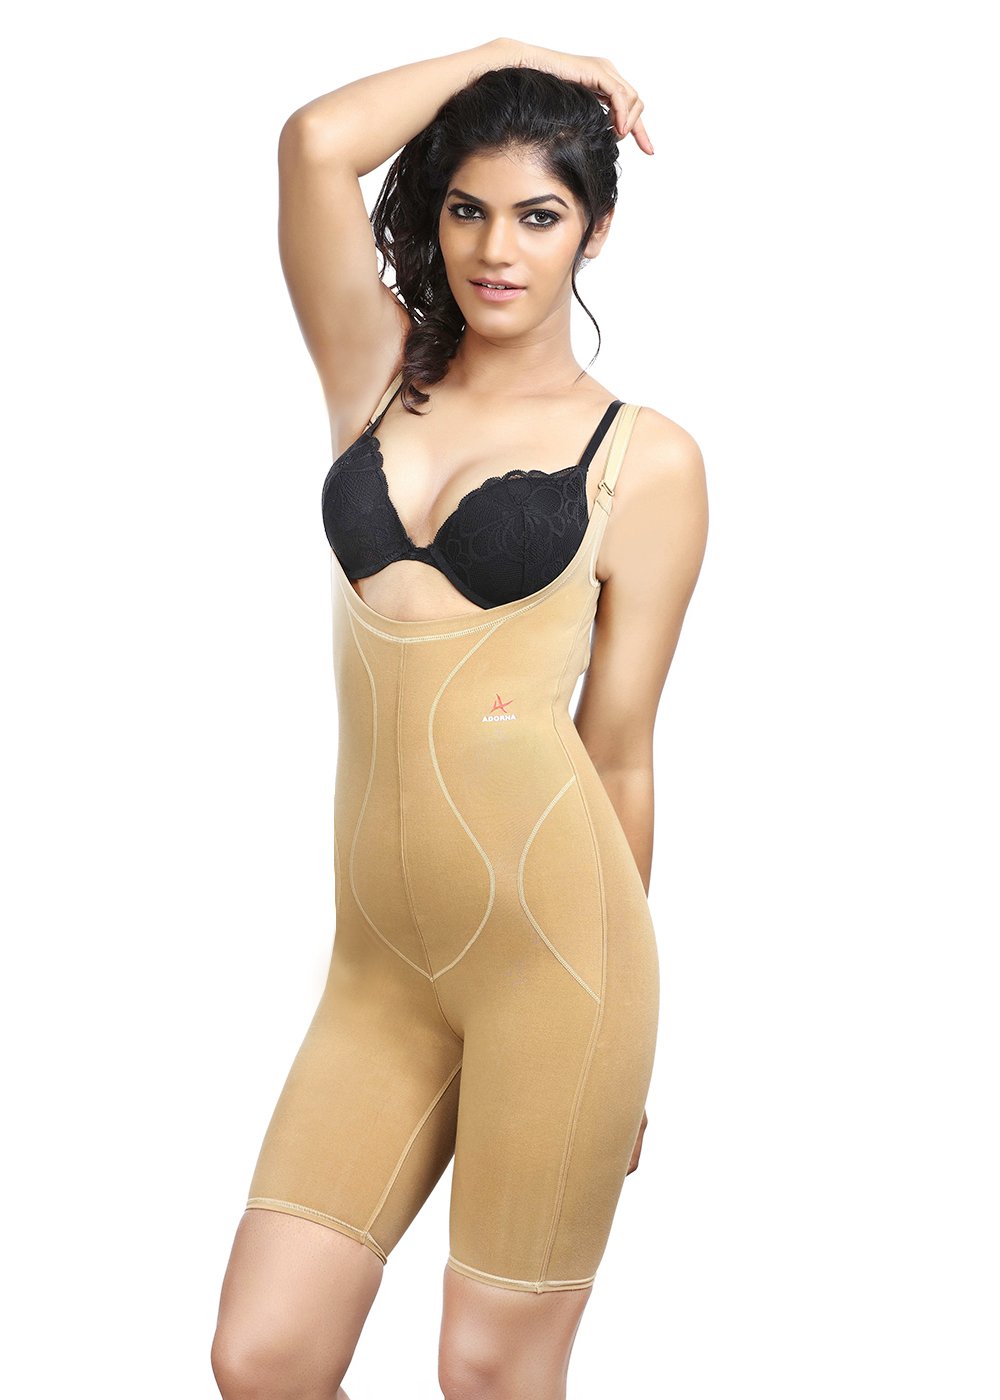 Adorna Body Slimmer - Cotton Blend High Compression Shapewear for Wome